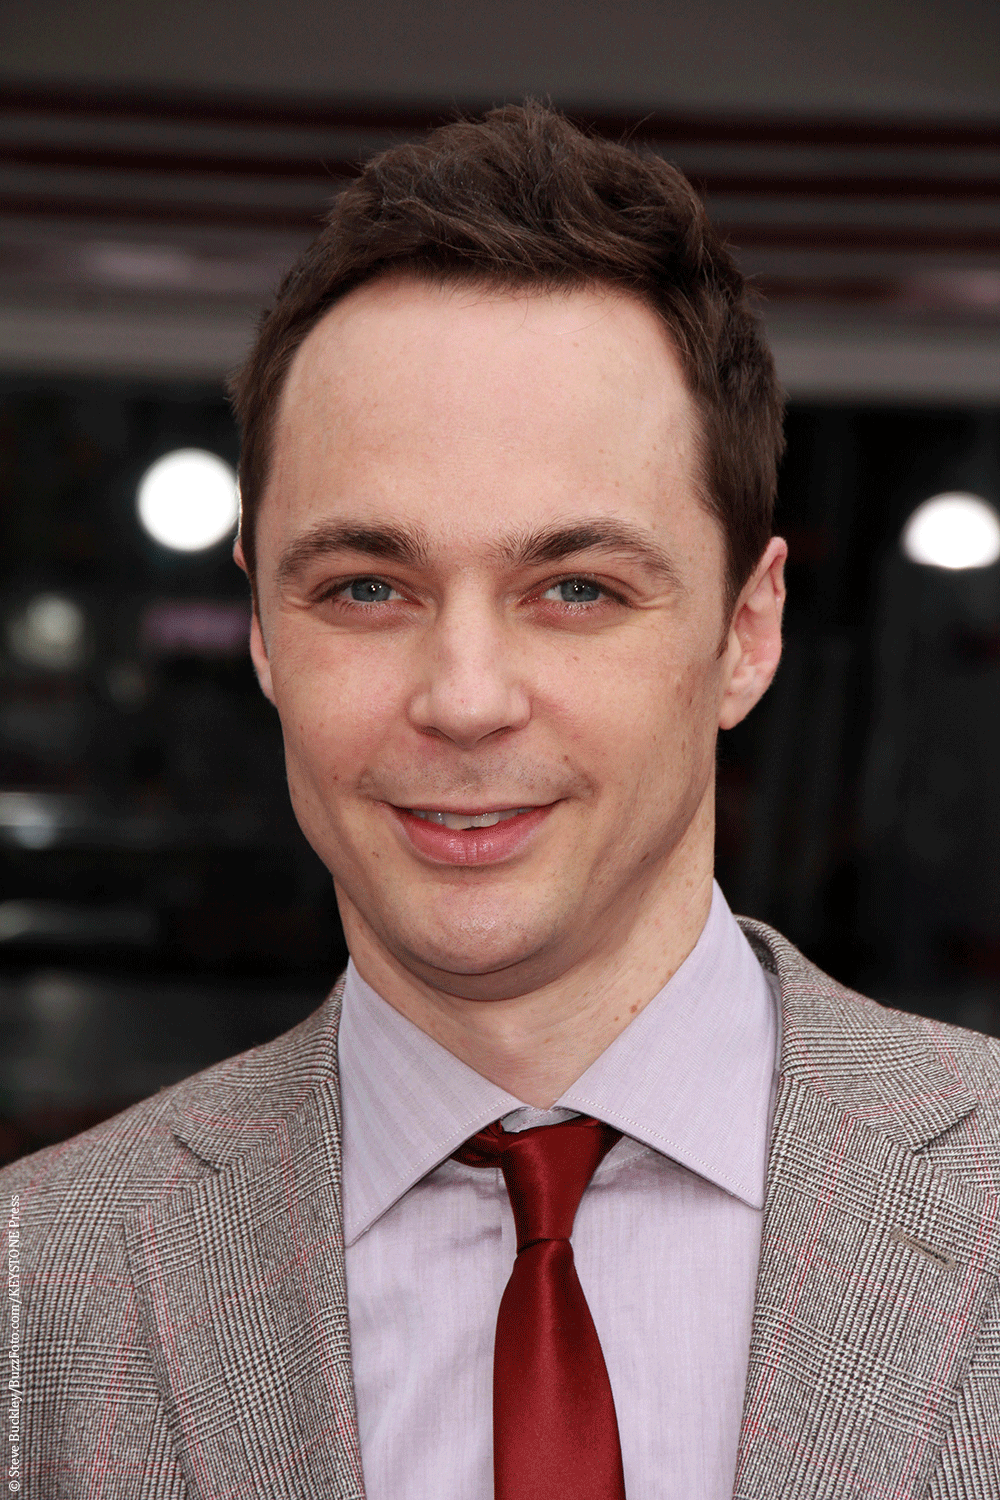 Jim Parsons, Johnny Galecki and Kaley Cuoco each make $1 million for their starring roles on The Big Bang Theory. The three actors have starred on the show since the beginning in 2007 and continue to do so, having just completed the eighth season.